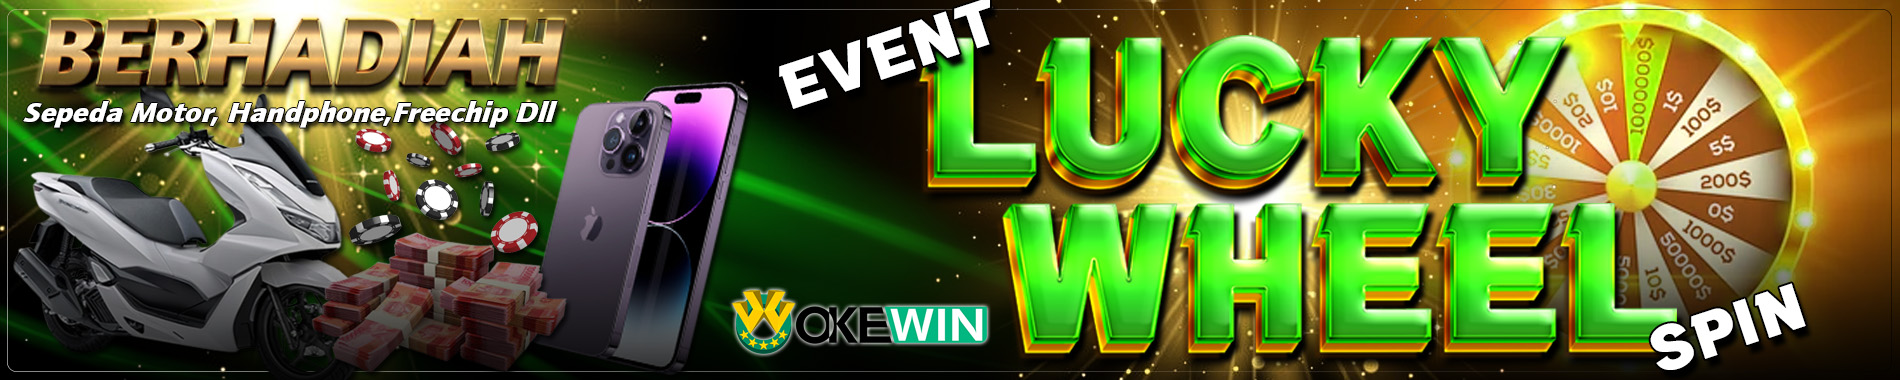 okewin - event lucky wheel spin